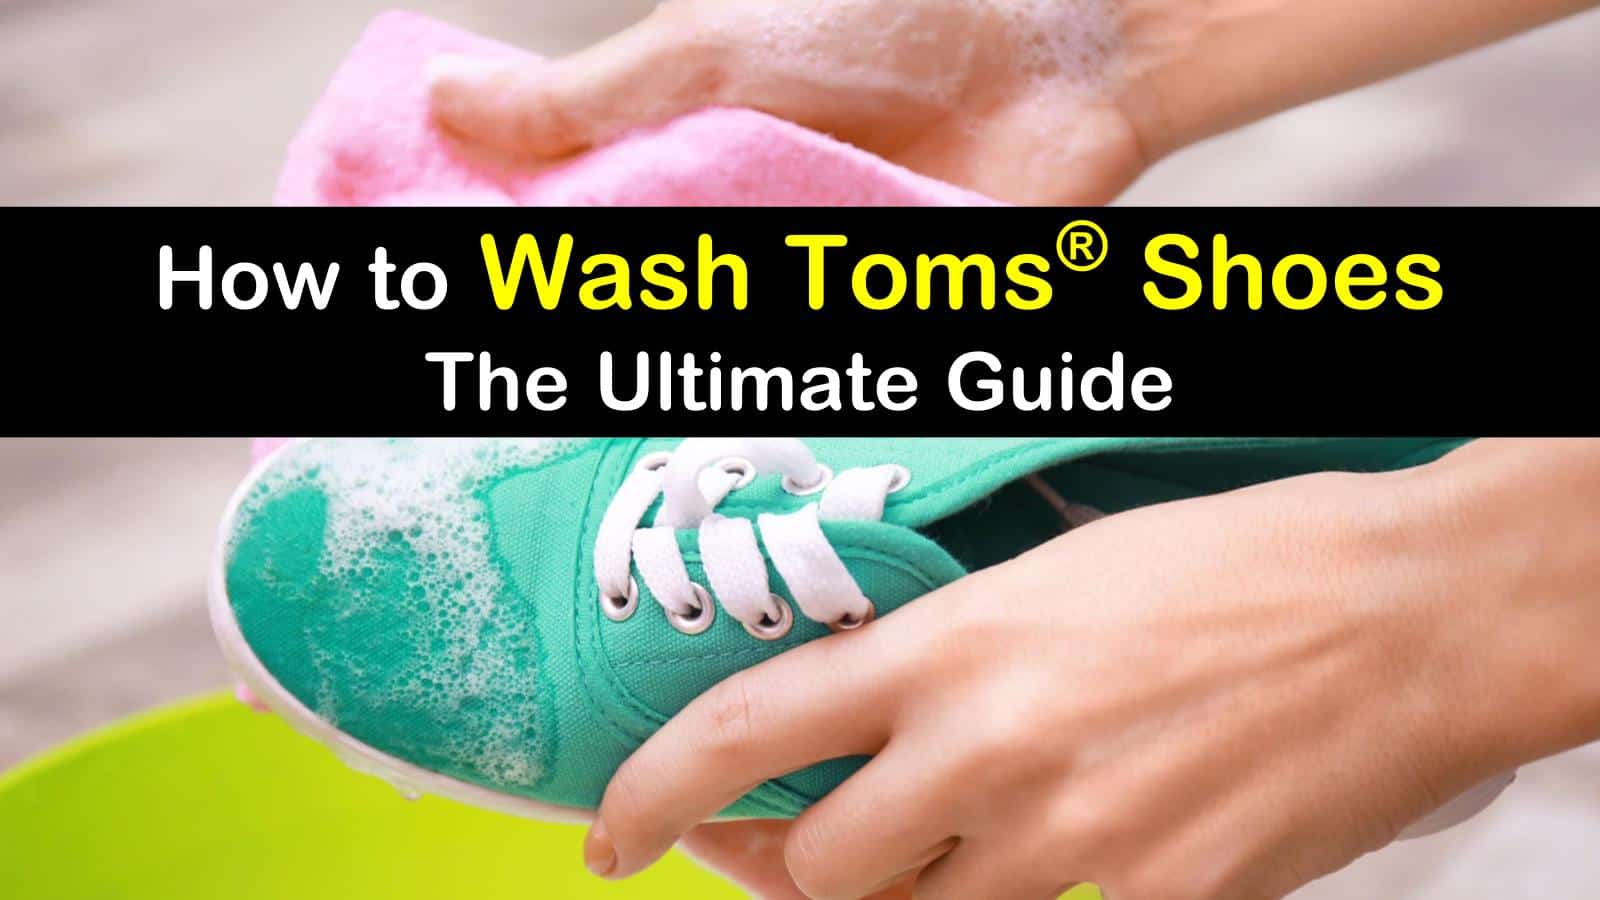 to Wash Toms® Shoes to Keep Them Clean